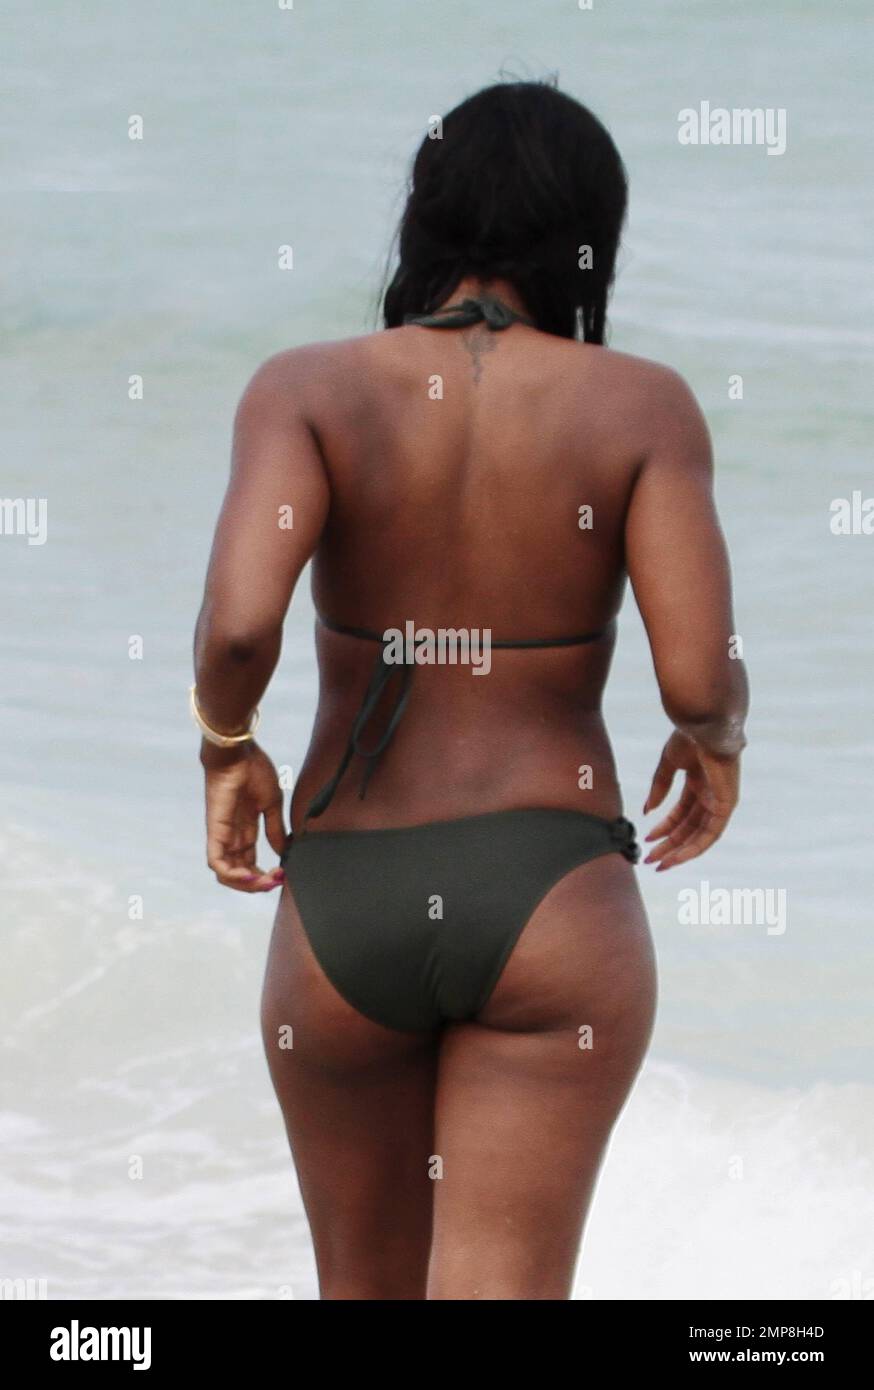 Allergisch Symposium Droogte Alexandra Burke shows off her bikini clad body in a military green two  piece as she takes a dip in the ocean in Miami Beach, FL. 26th June 2012  Stock Photo - Alamy